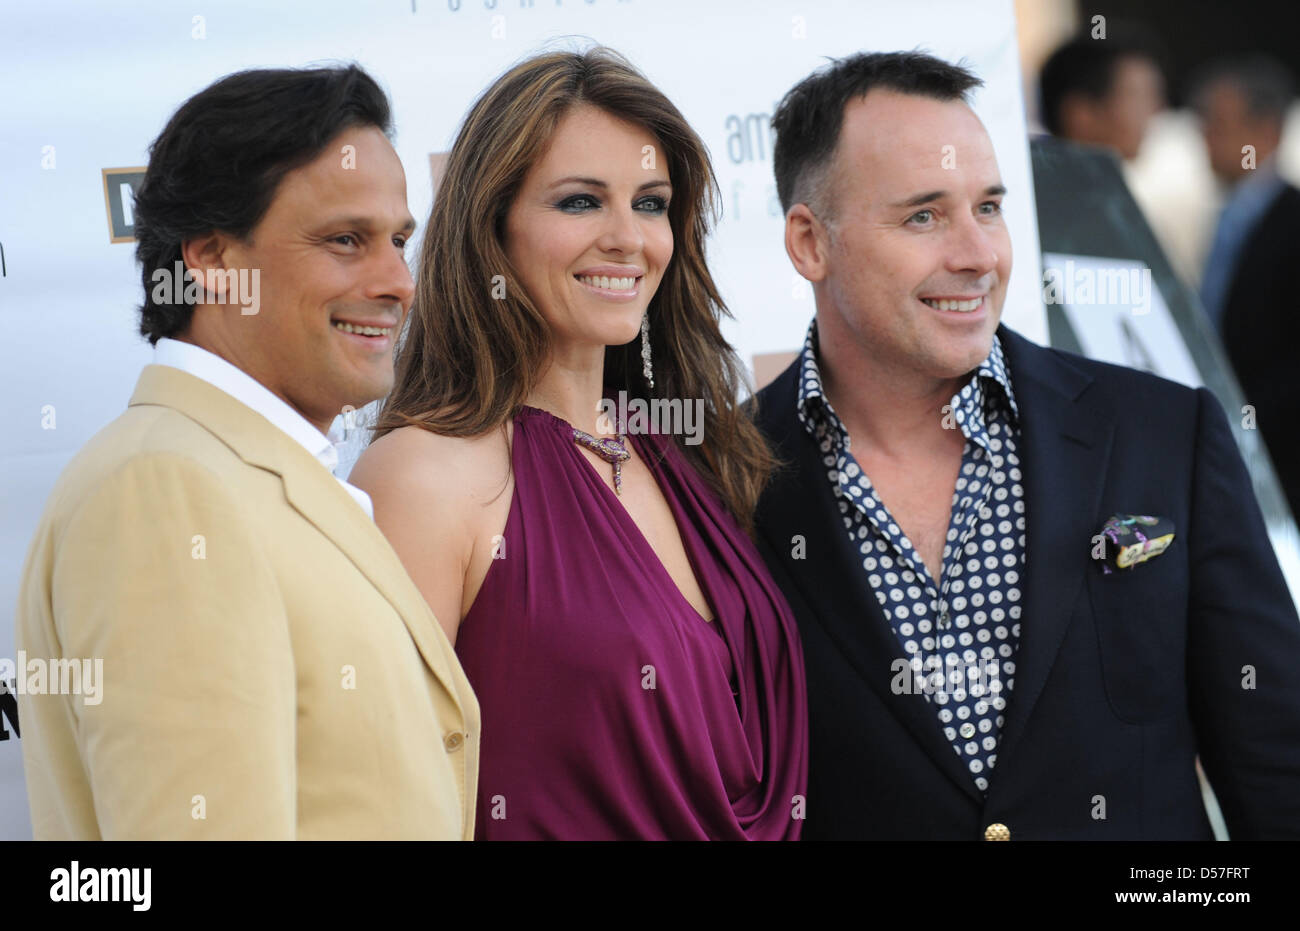 British actres and model Liz Hurley (C), her husband Arun Nayar (L) and Elton John's husband David Furnish (R) attend a fashion show by Amber Lounge in Monte Carlo, Monaco, 14 May 2010. Photo: Peter Steffen Stock Photo